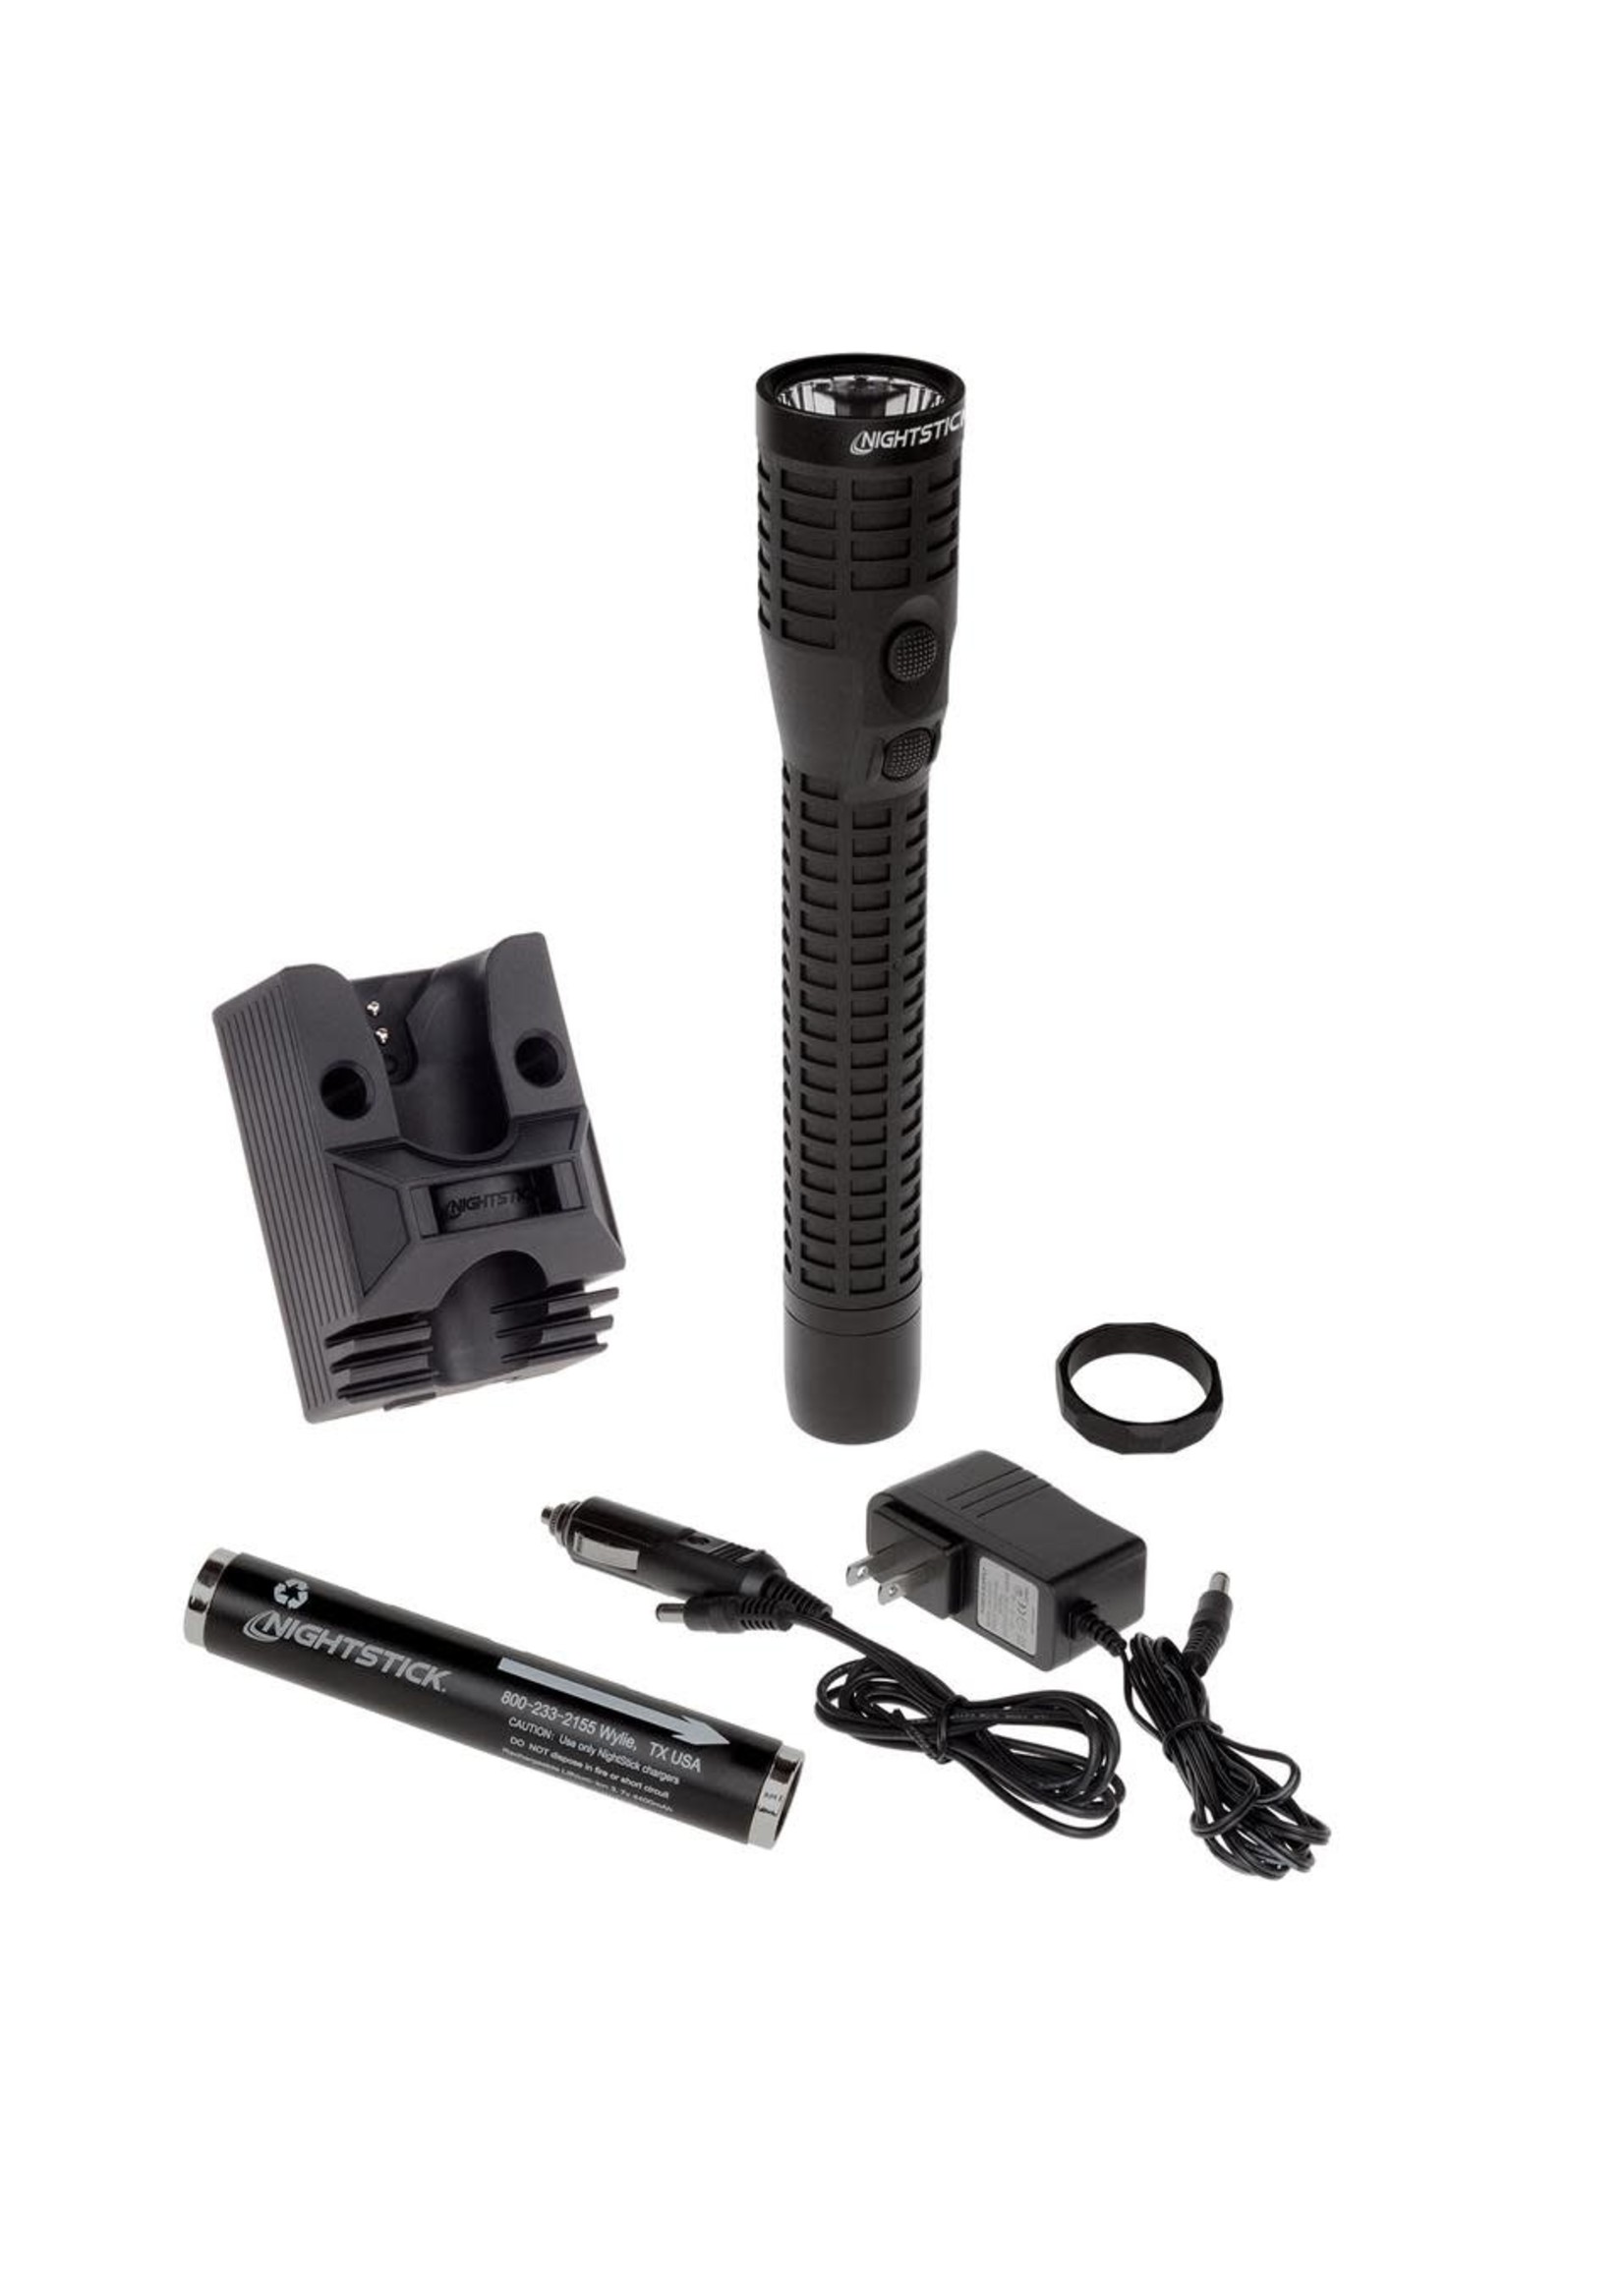 Nightstick Polymer Multi-Function Rechargeable Duty/Personal-Size LED Dual-Light - Black